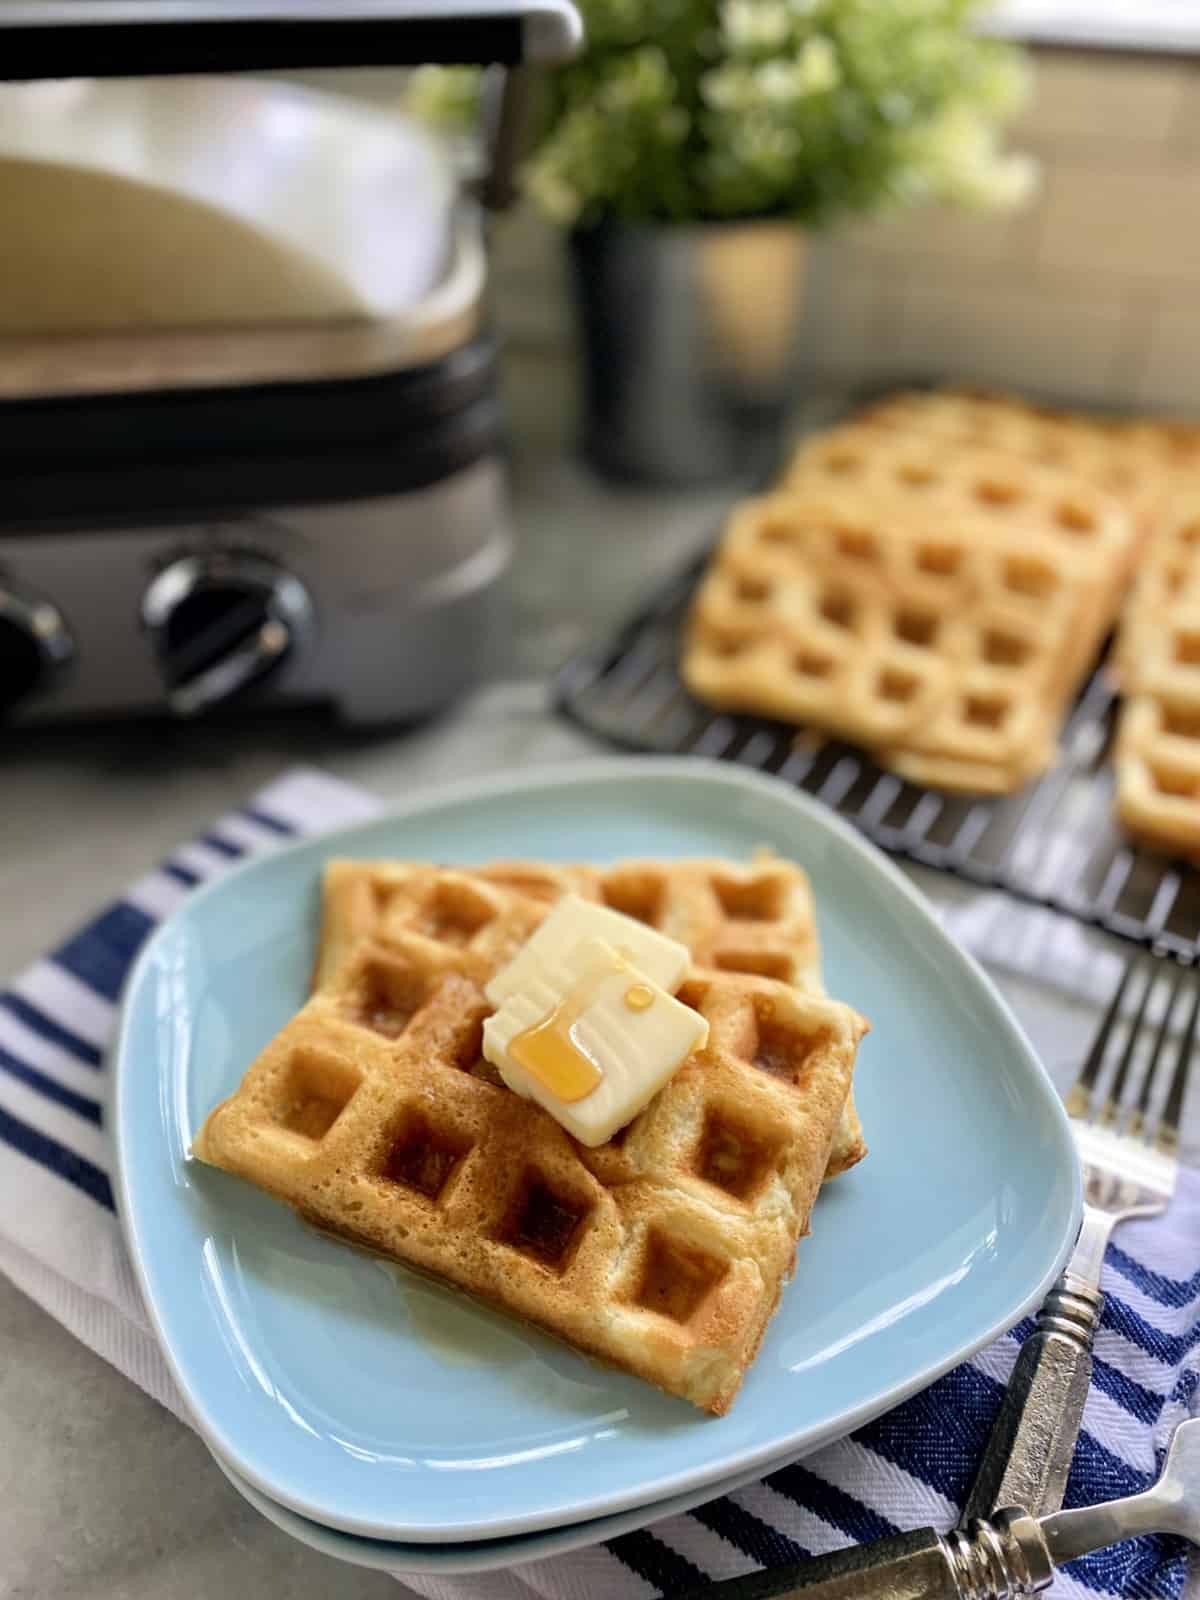 Blue plate with two rectangular waffles with butter and syrup on them with waffles in background.